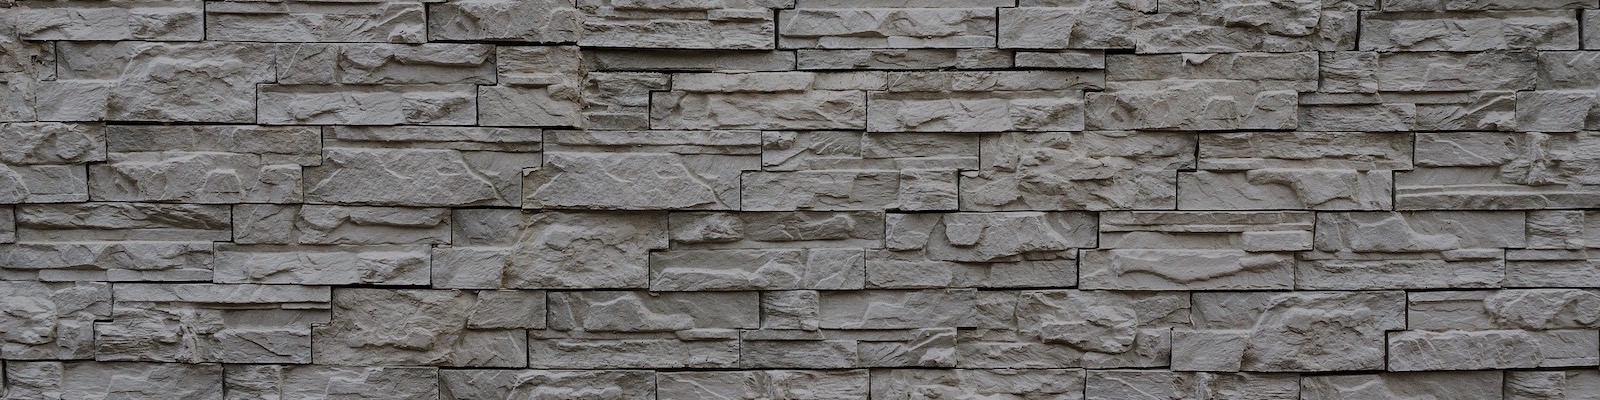 wall made of stones cut in rectangles